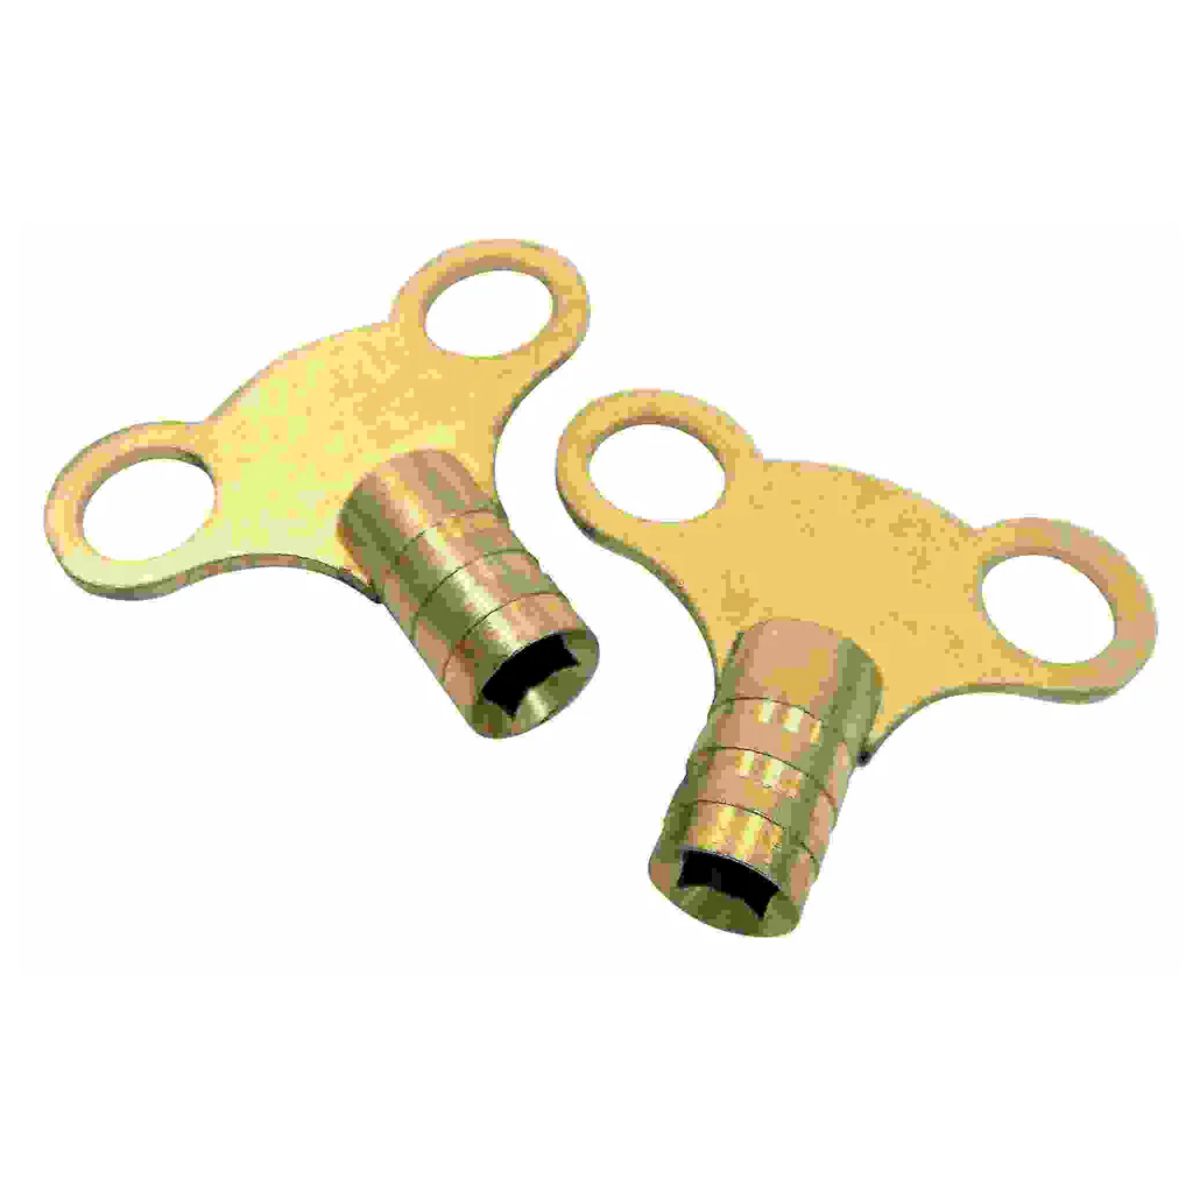 Two Star Pack - Radiator Key Solid Brass on a white background.